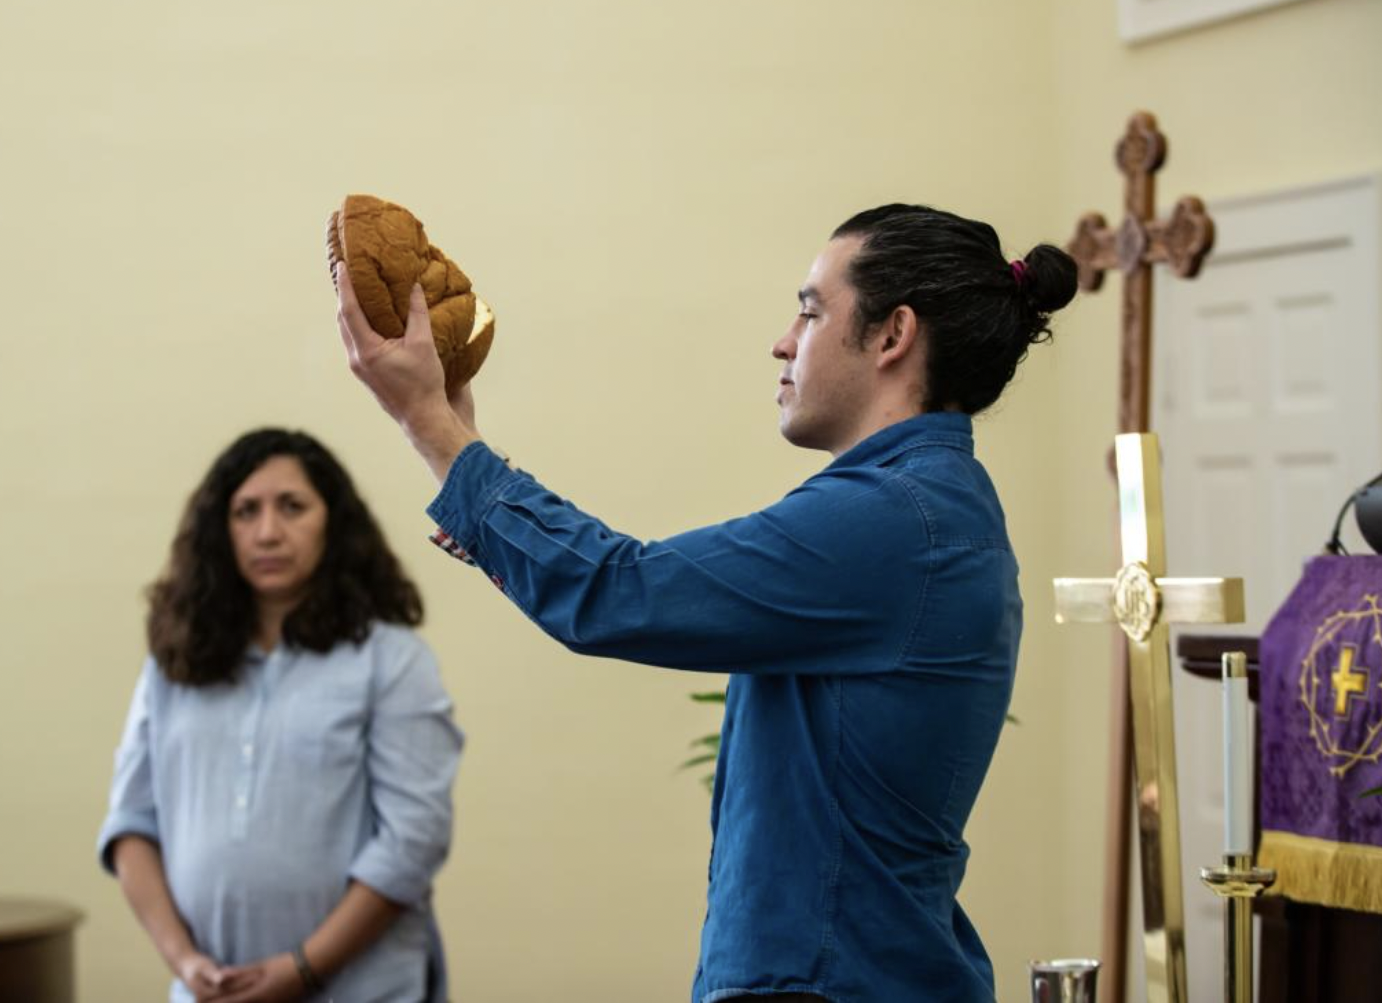 Pastor Jason Villegas holds up a loaf of bread symbolizing the body of Christ for a communion ceremony.